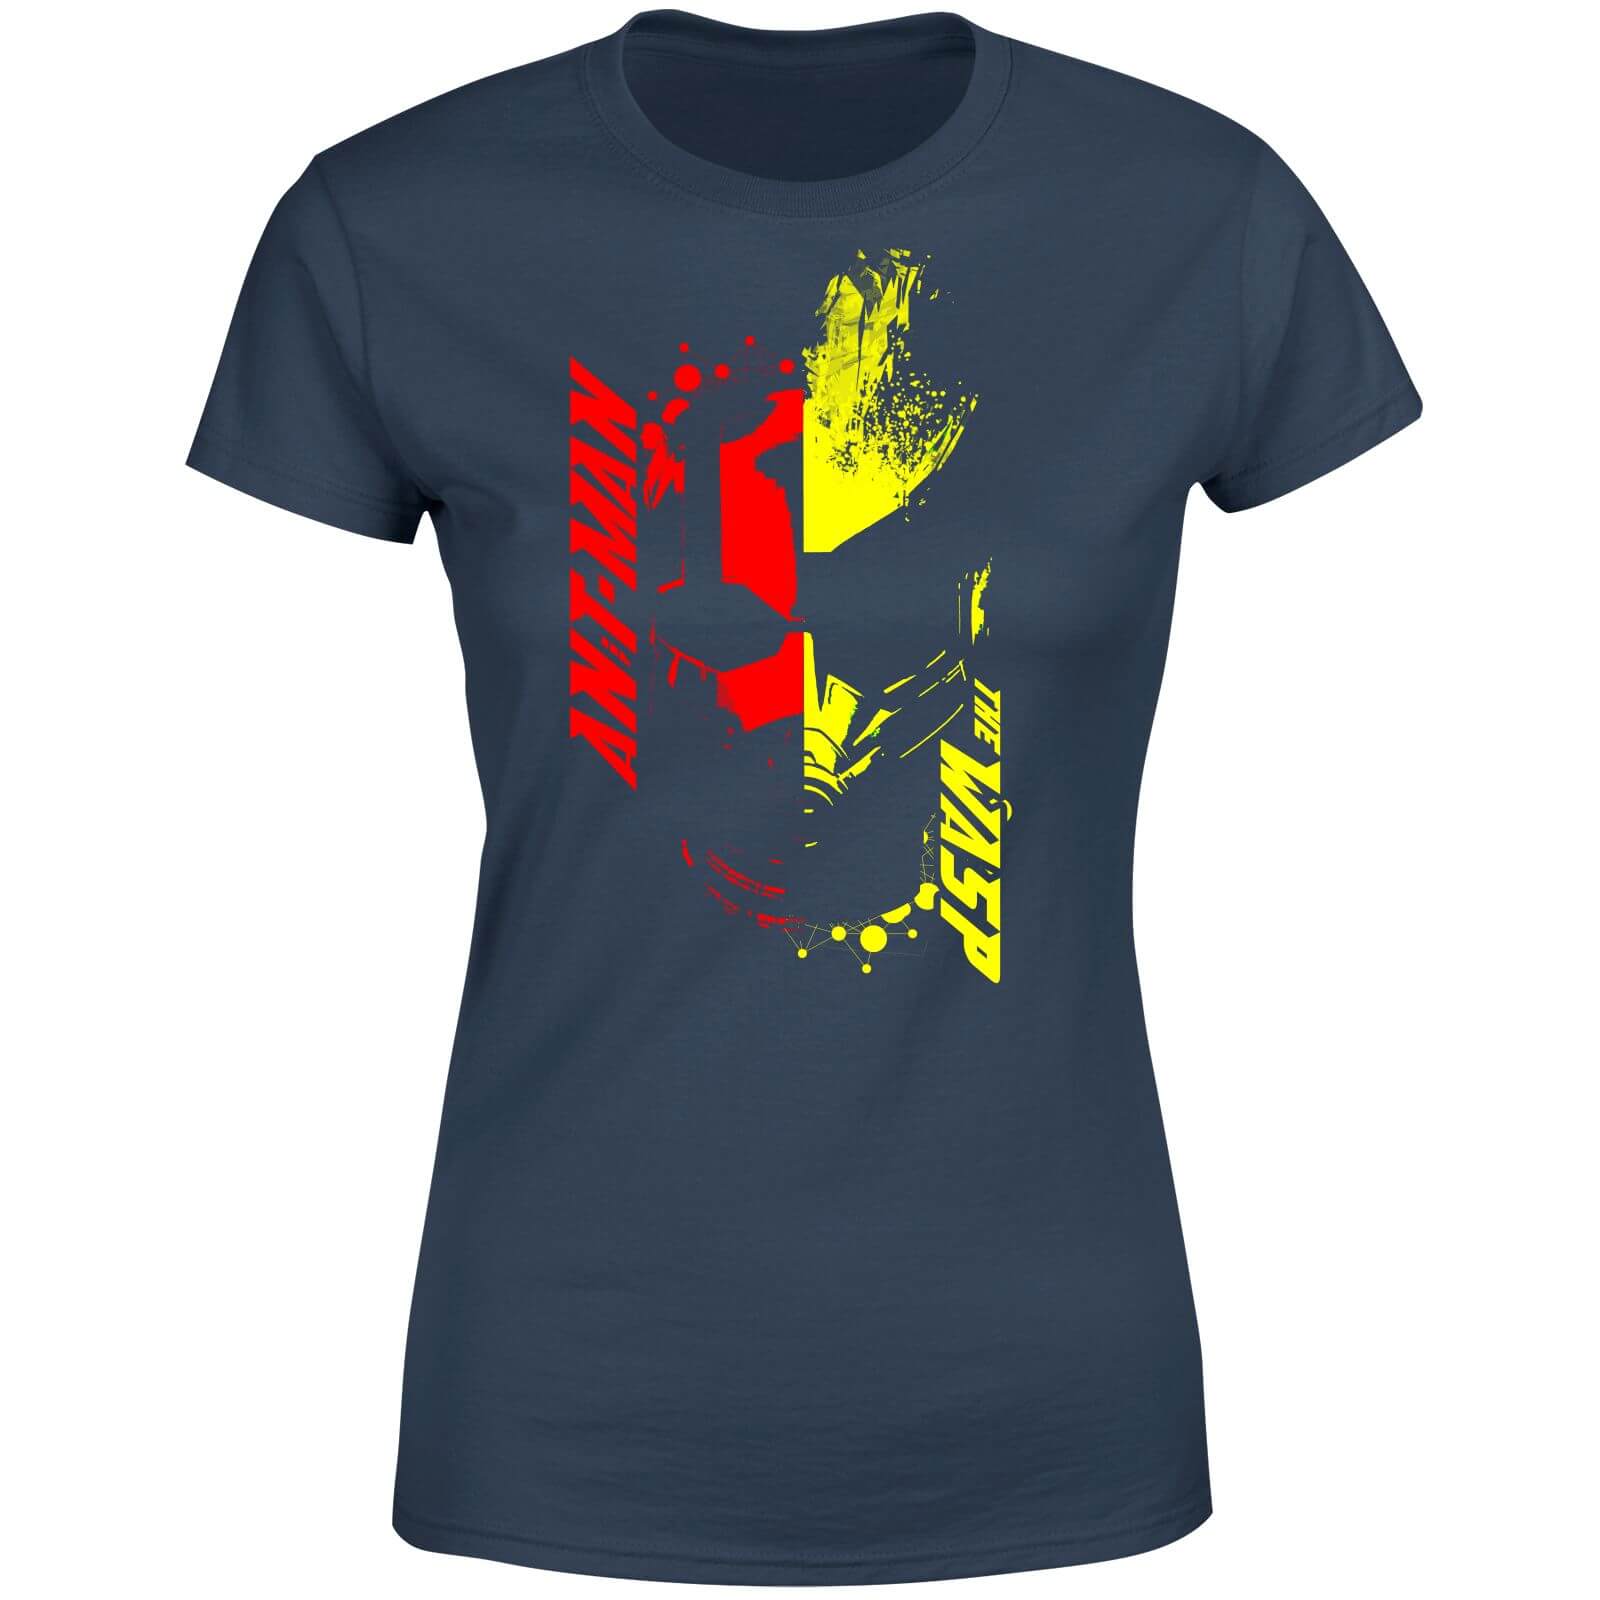 Ant-Man And The Wasp Split Face Damen T-Shirt - Navy Blau - S